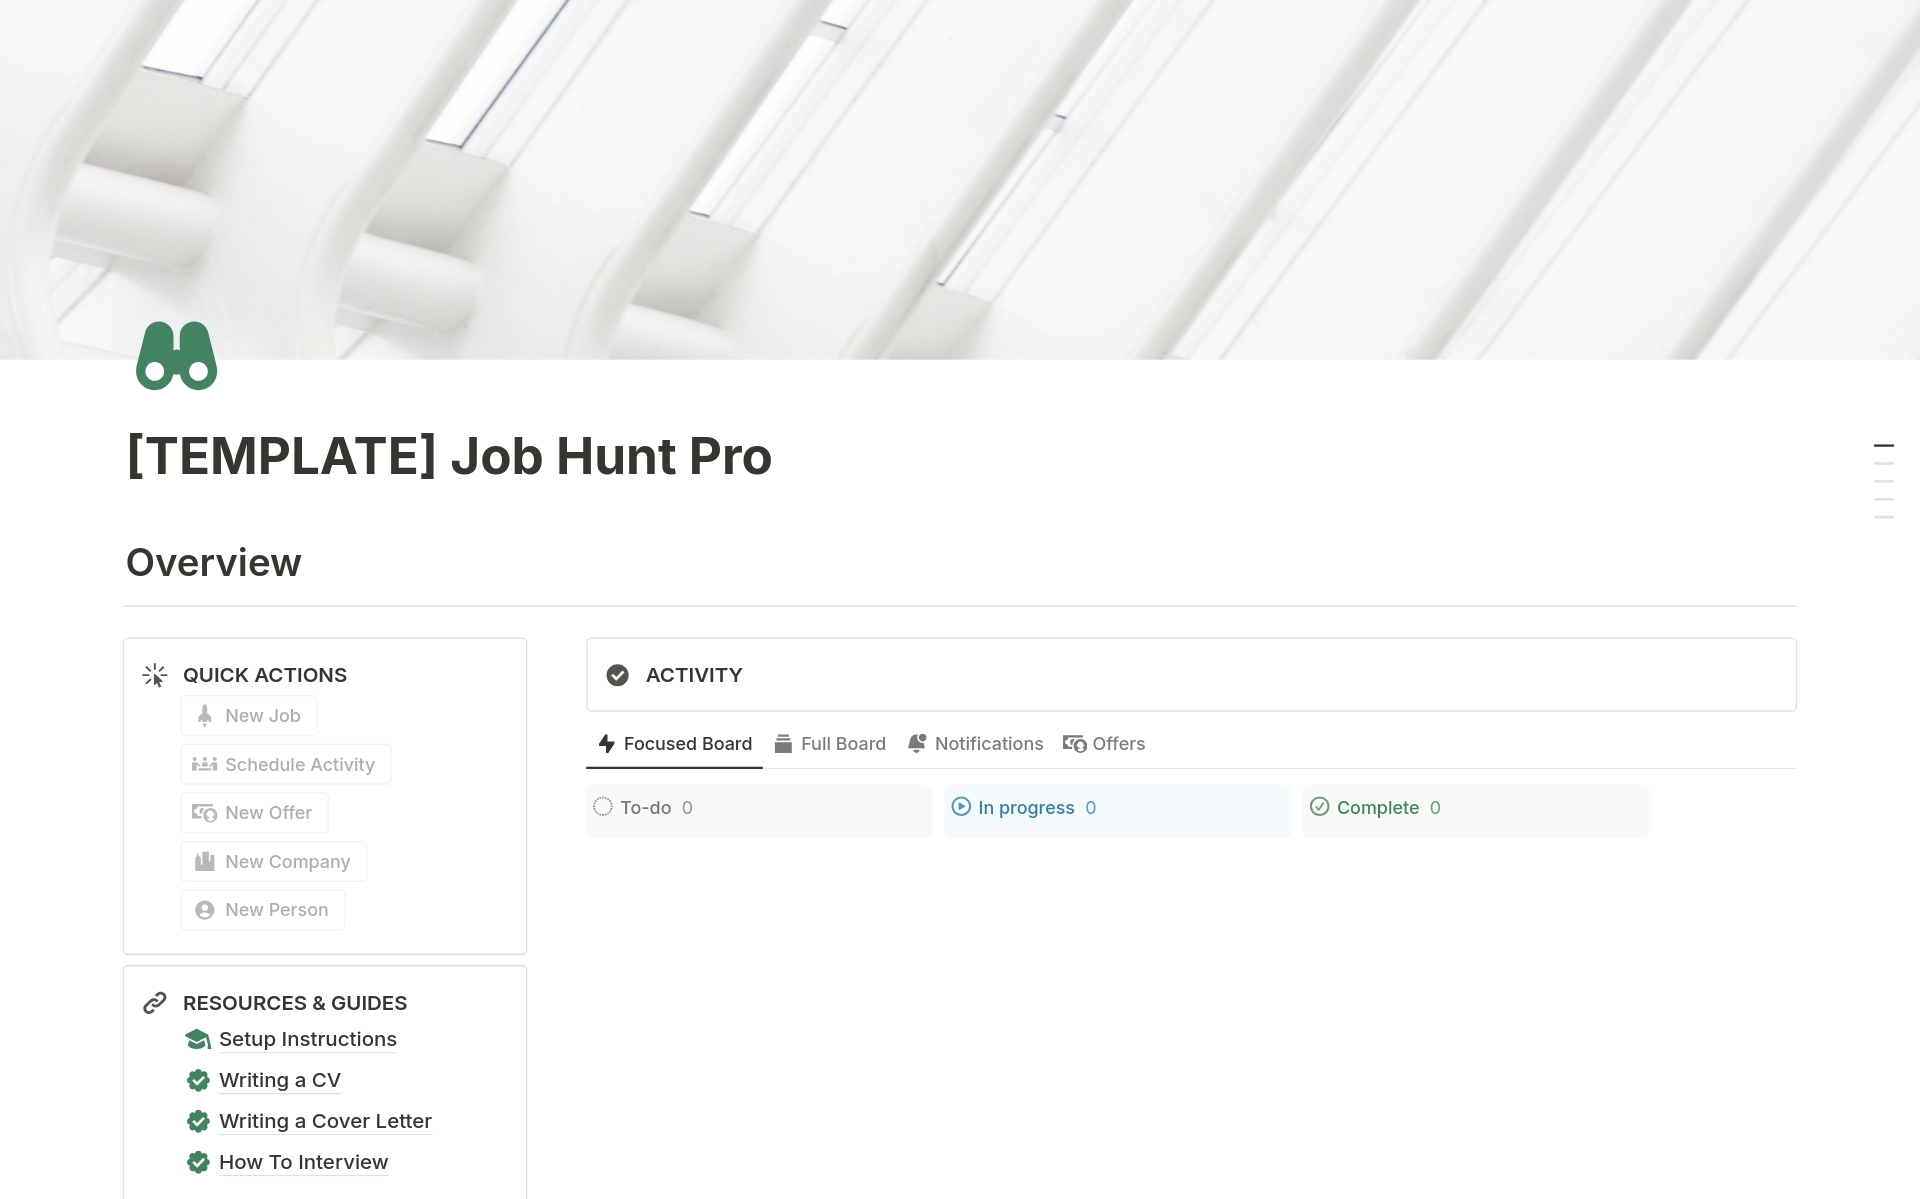 Take Control of Your Job Hunt: Organize Your Process, Optimize Your Applications and Get Hired